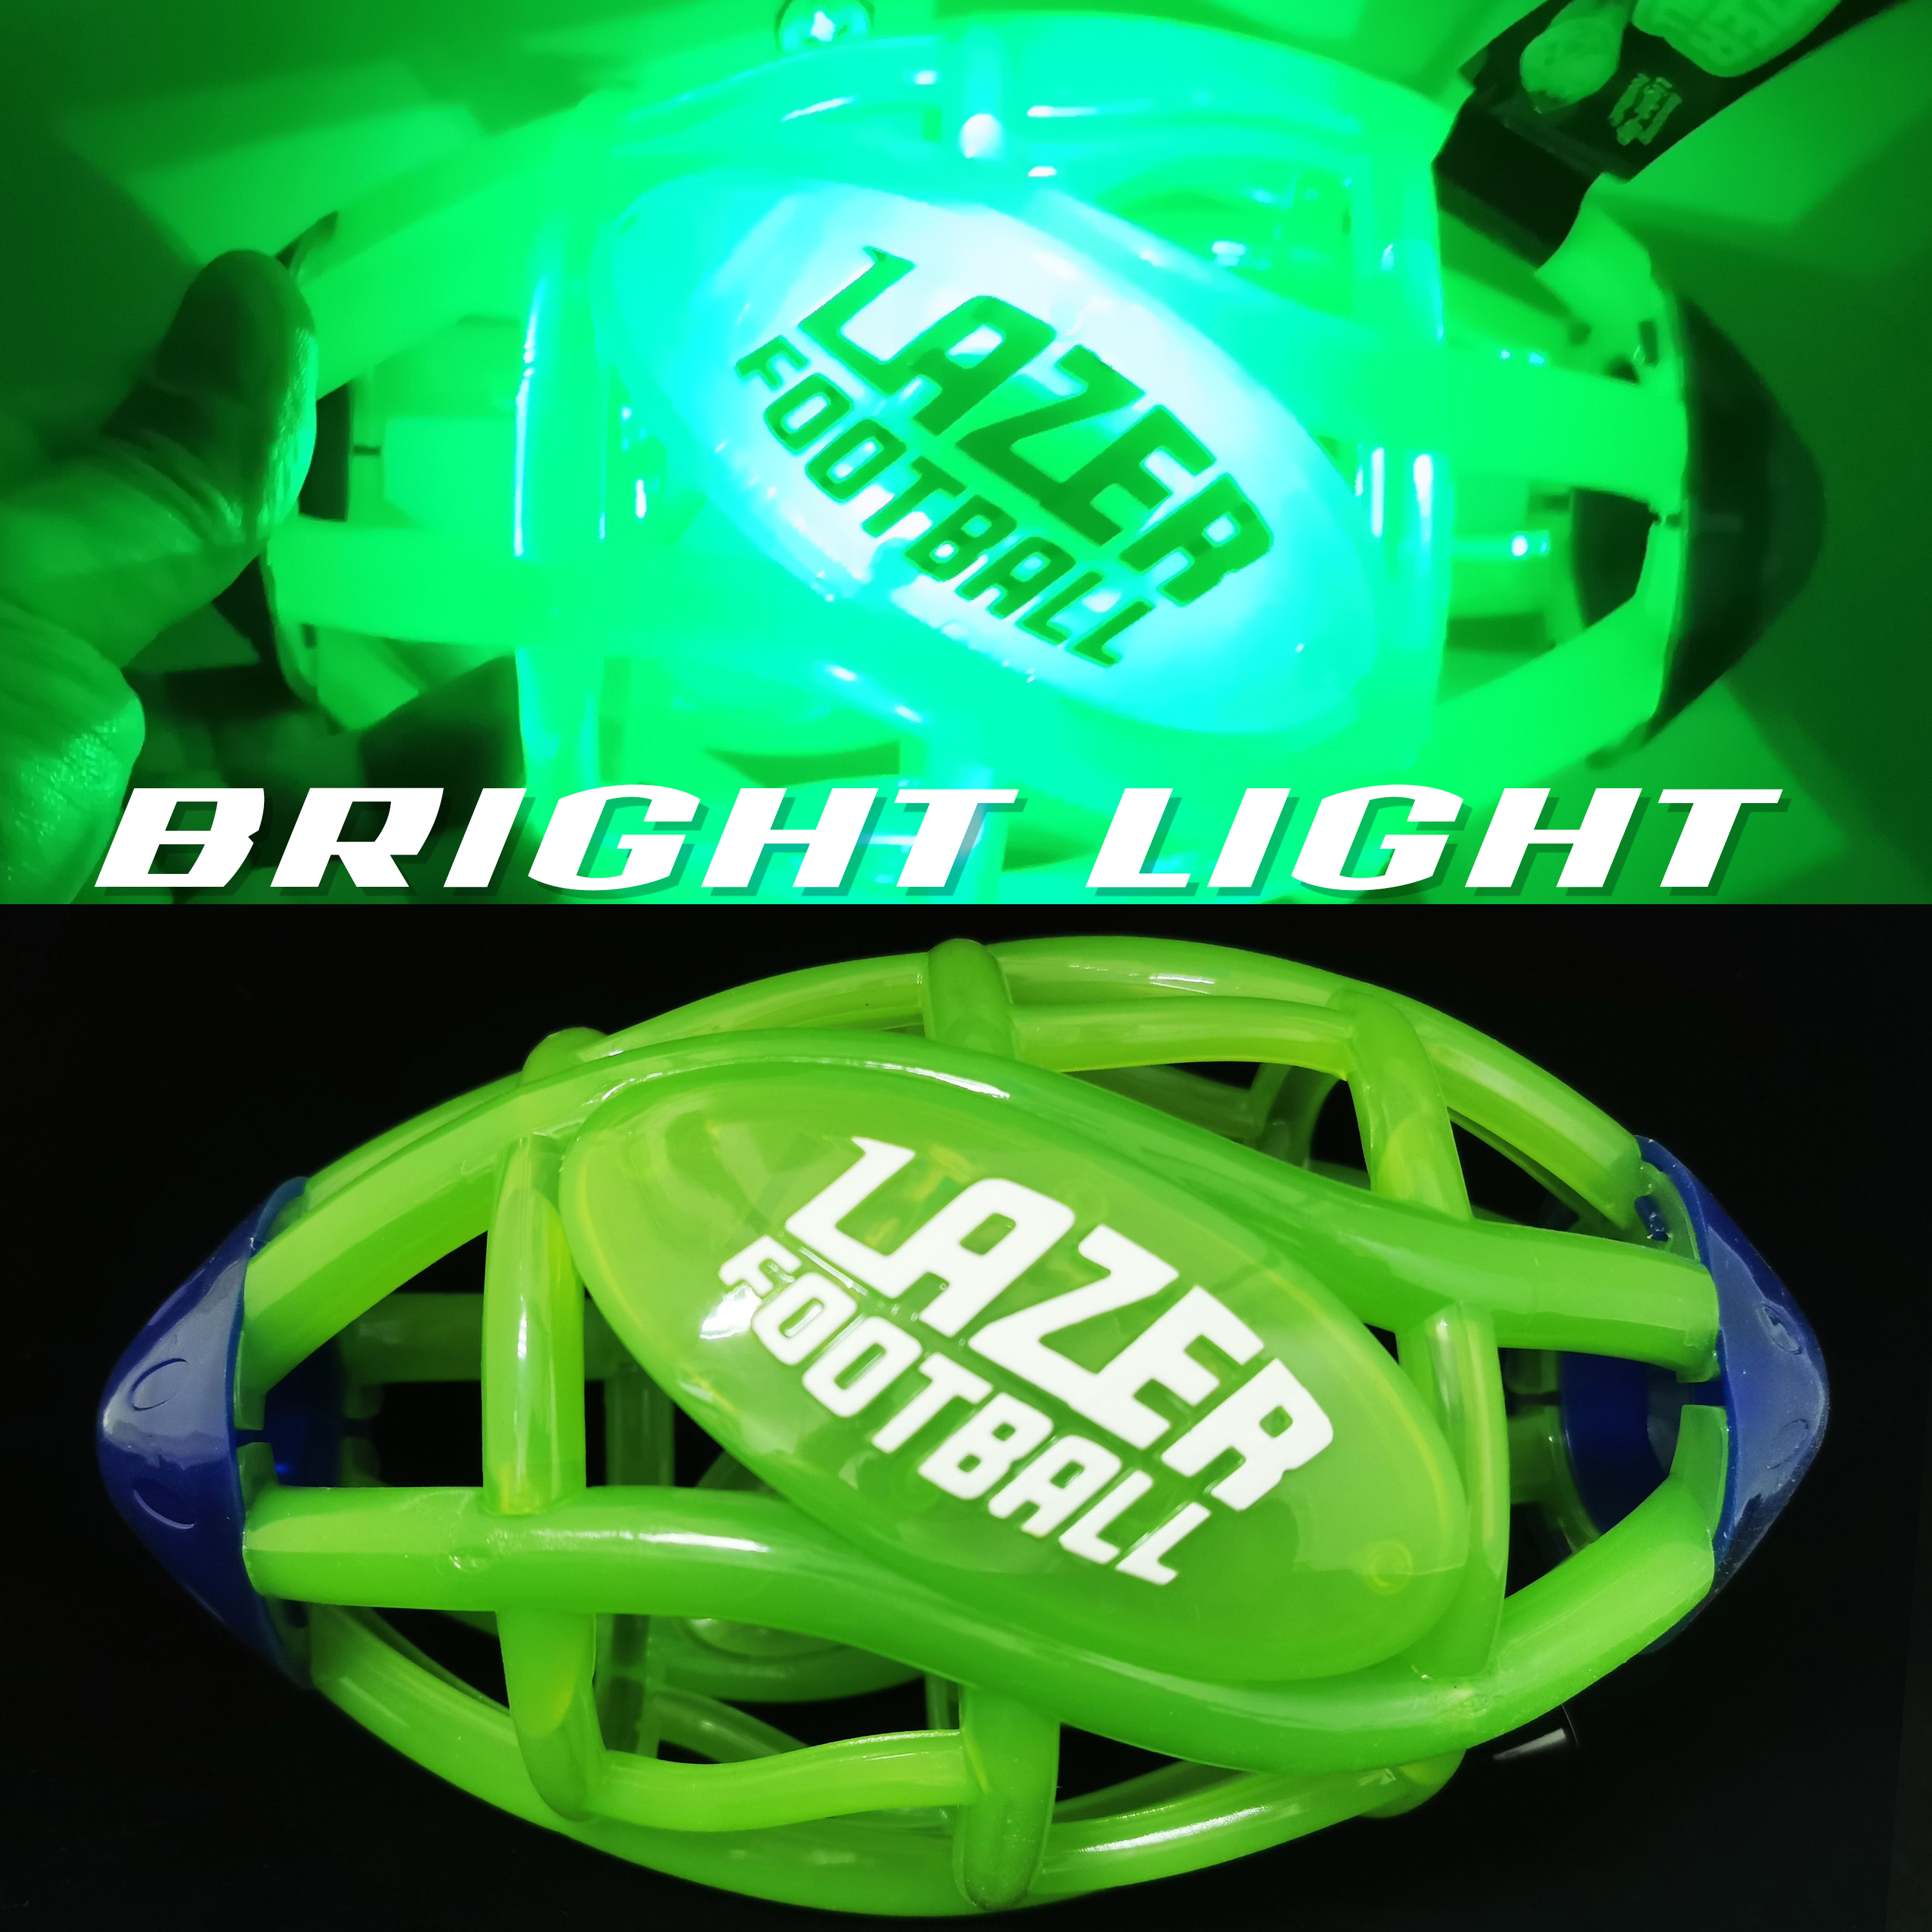 Lazer Light Up Glow Rubber Toy Football, Green and Blue, Pee Wee Size 3 - image 5 of 5